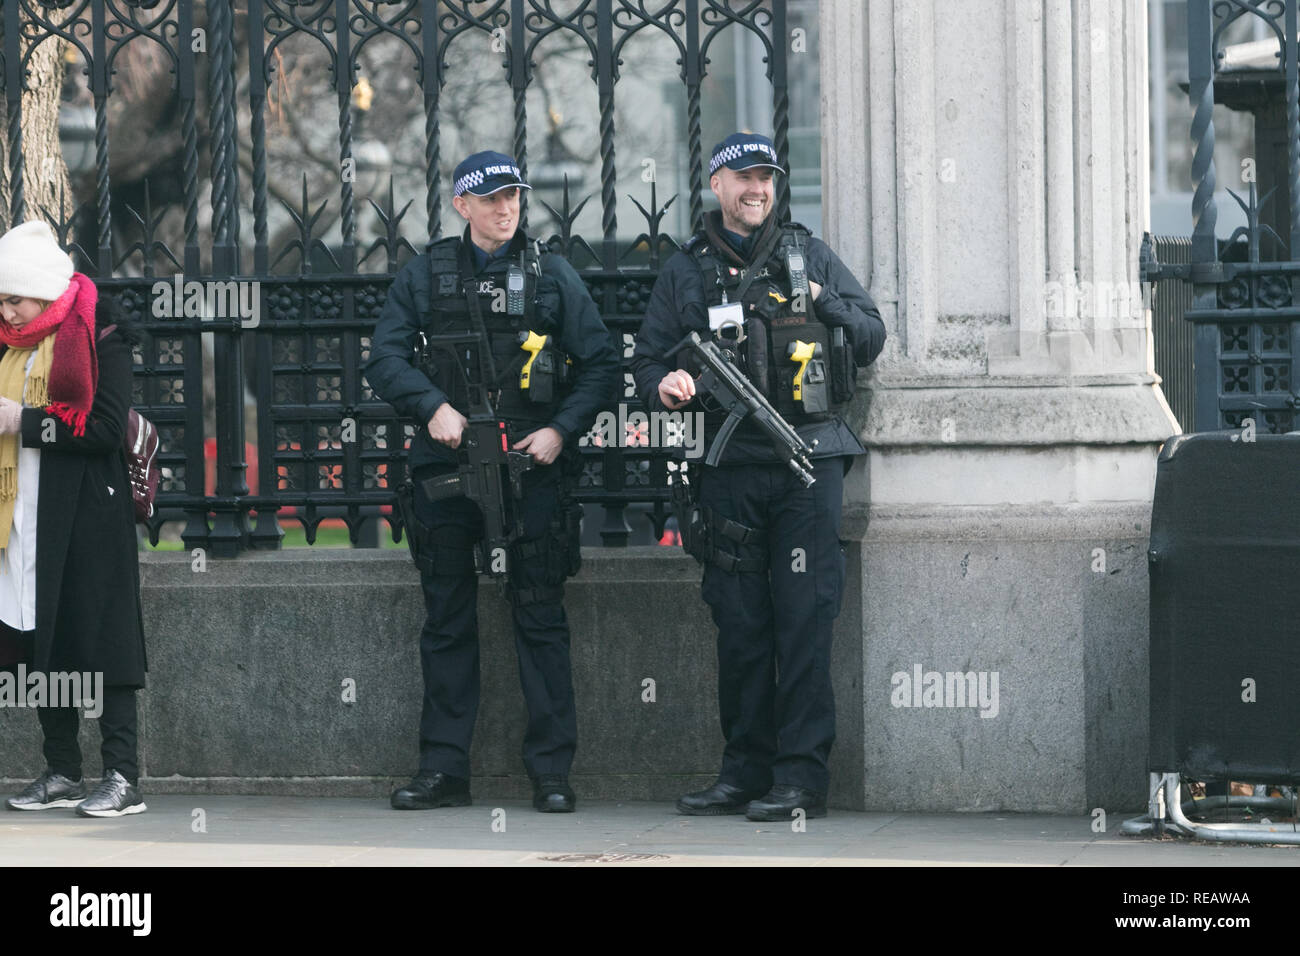 London UK. 21st January 2019. Increased security in Westminster as armed police officers patrol around Parliament Square on the day Prime Minister Theresa May delivers her Plan B for Brexit to Parliament Credit: amer ghazzal/Alamy Live News Stock Photo